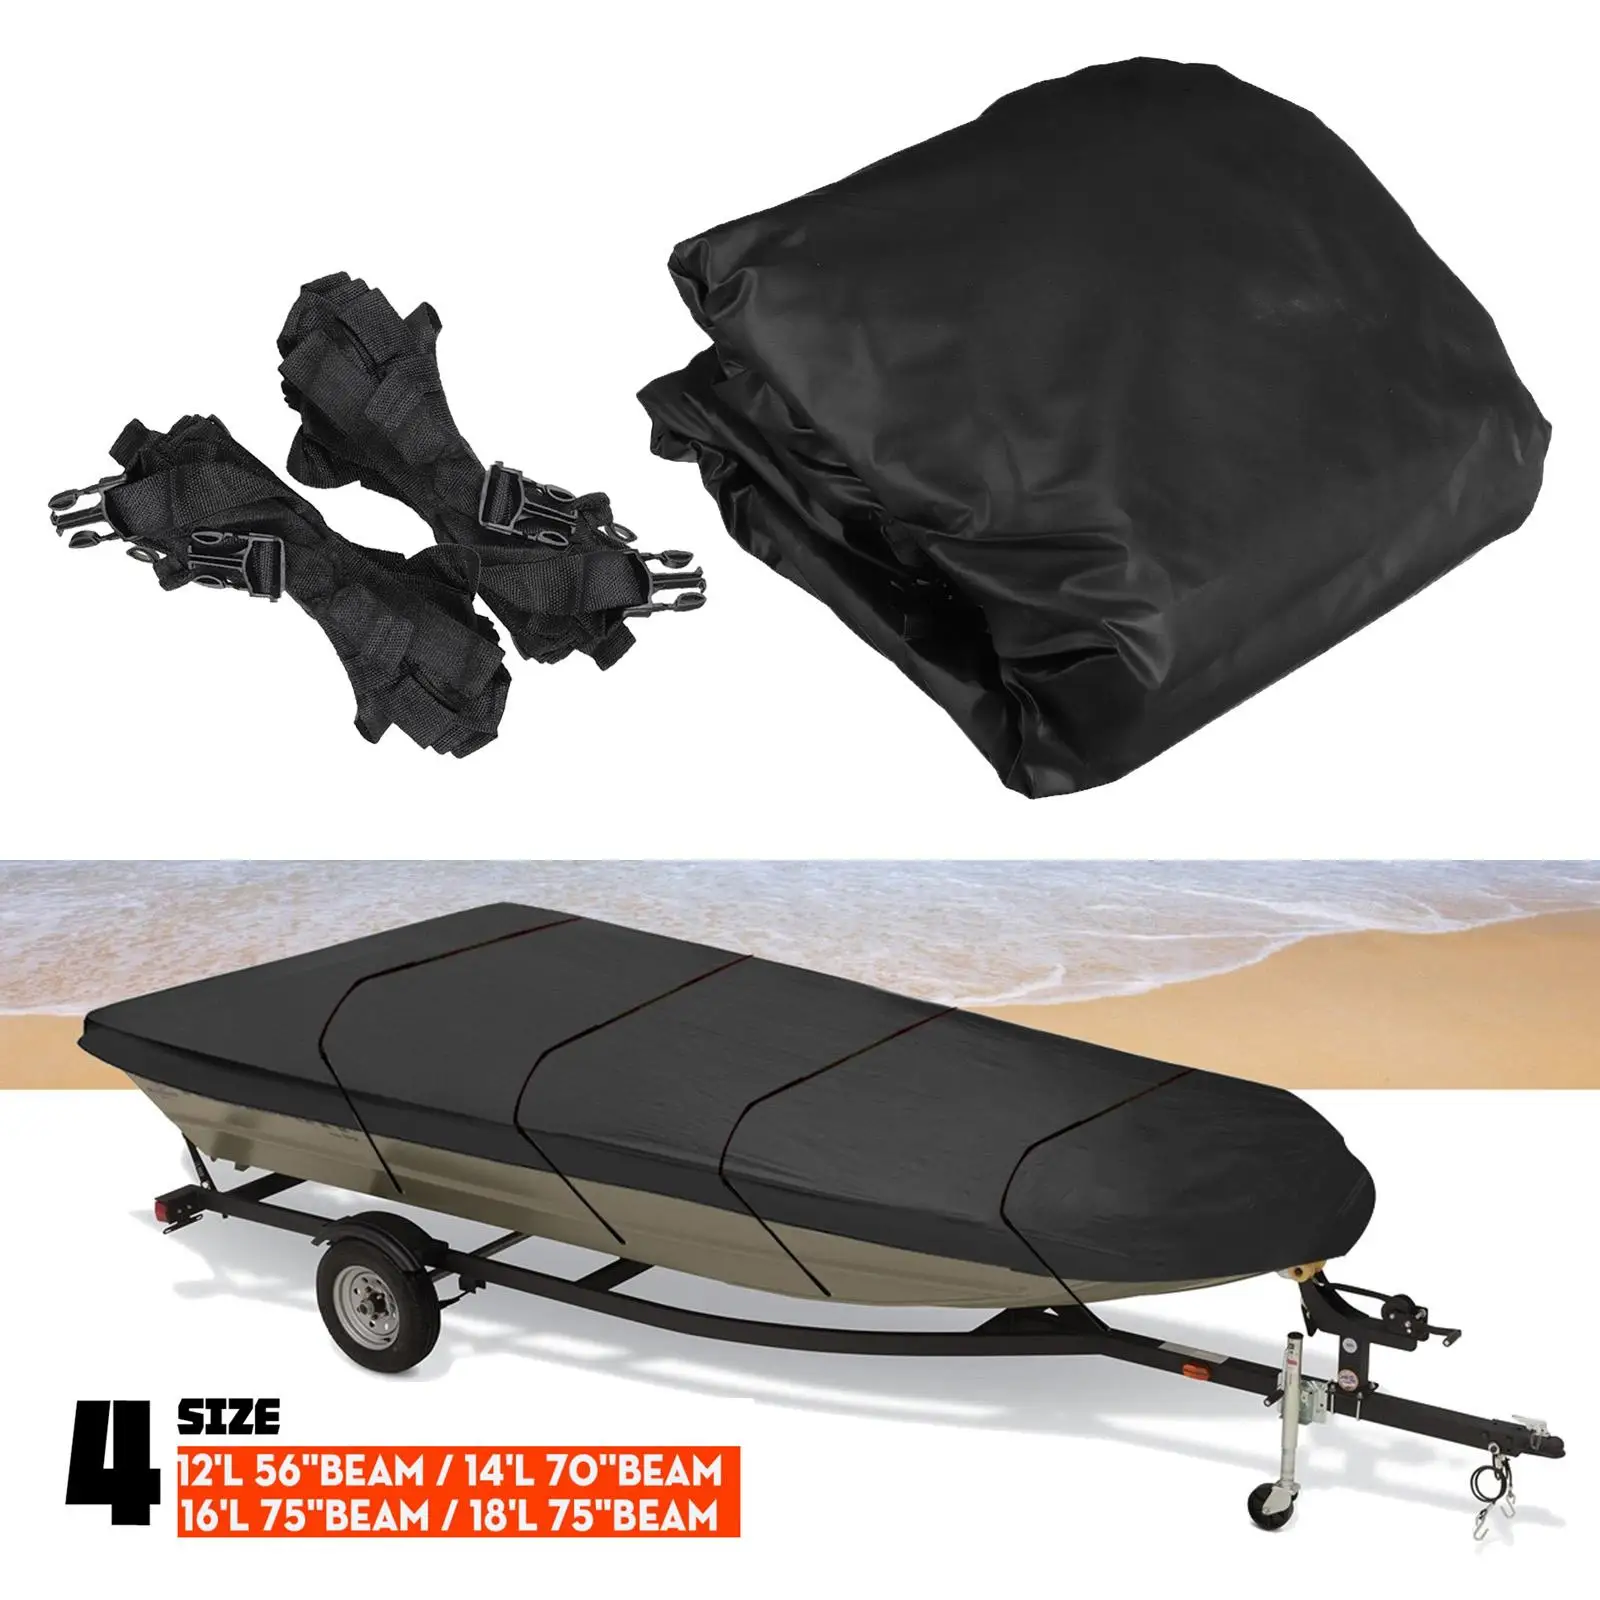 1 Set  Cover Dustproof Waterproof  Durable  Long-Term Replacement  for Trailerable Boat Heavy Duty Marine